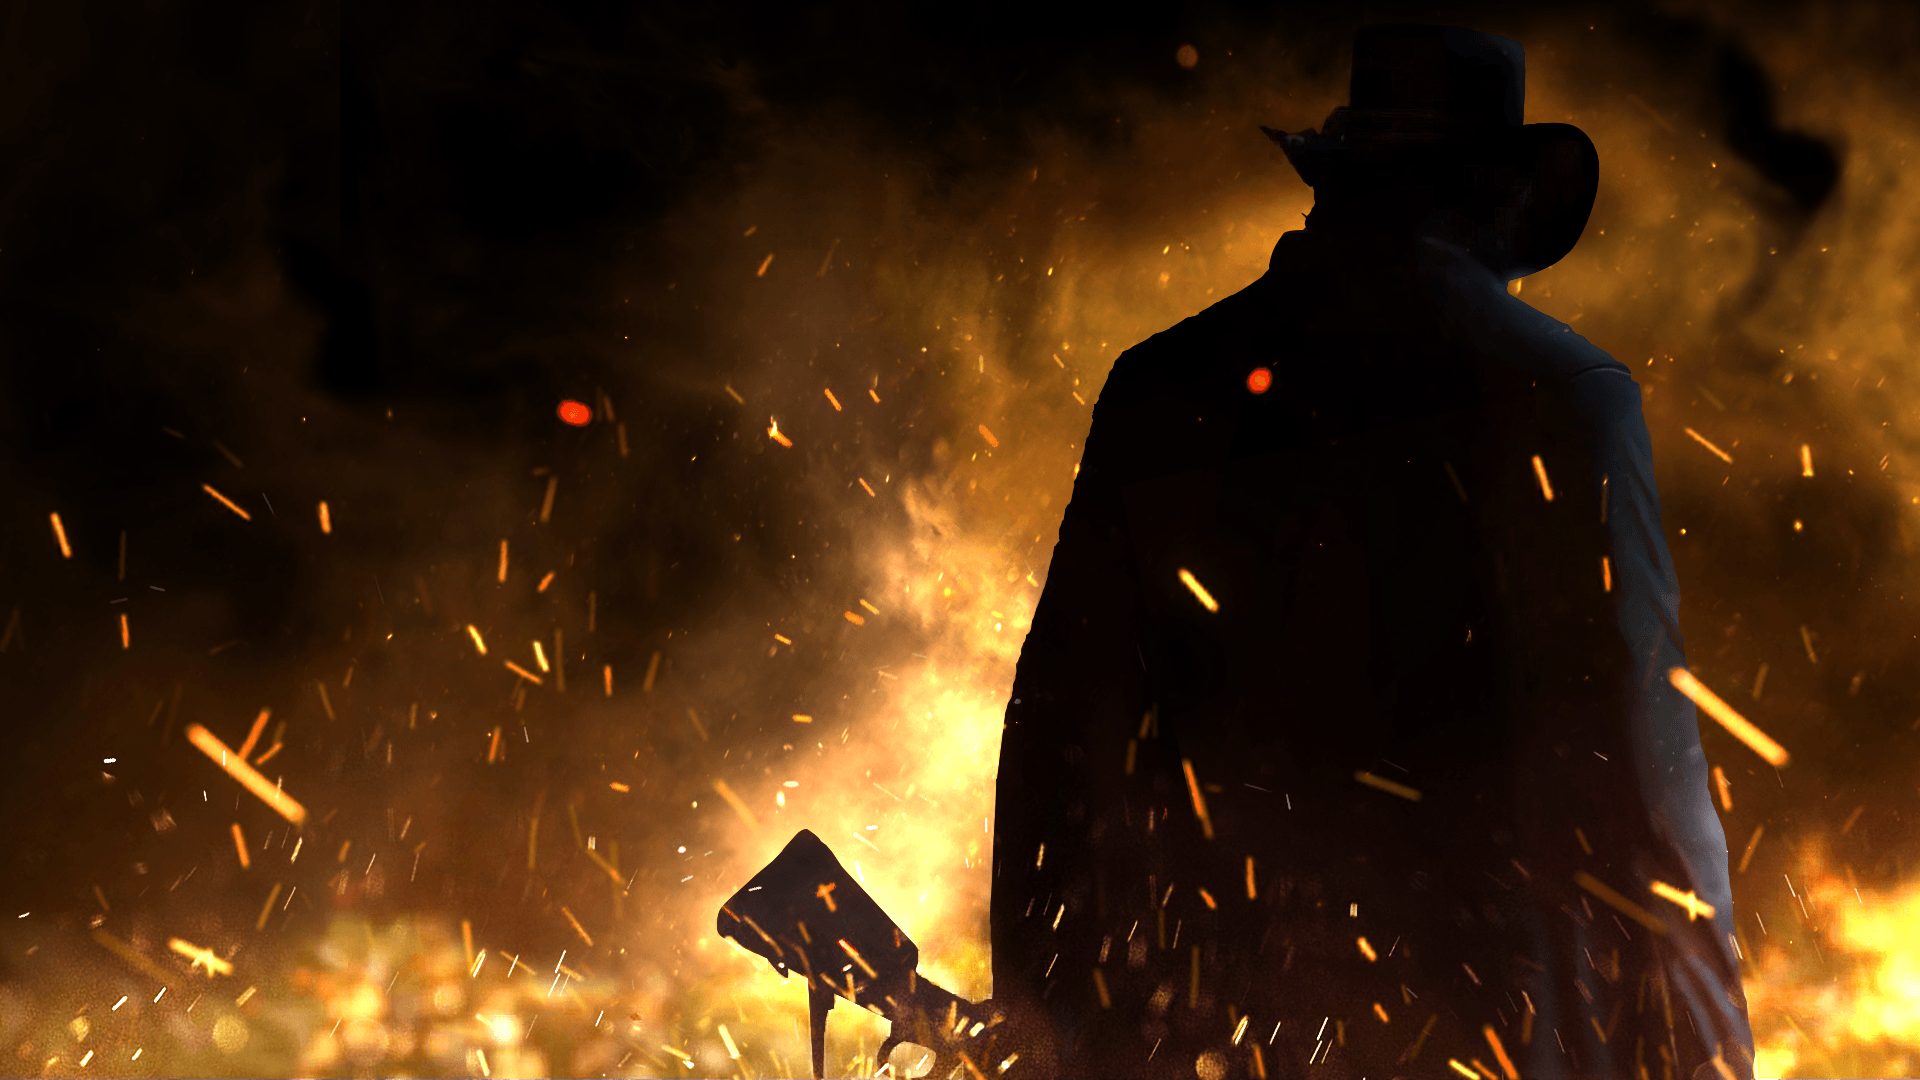 Red Dead Redemption 2 Wallpapers HD, Game Wallpaper, Wallpapers HD